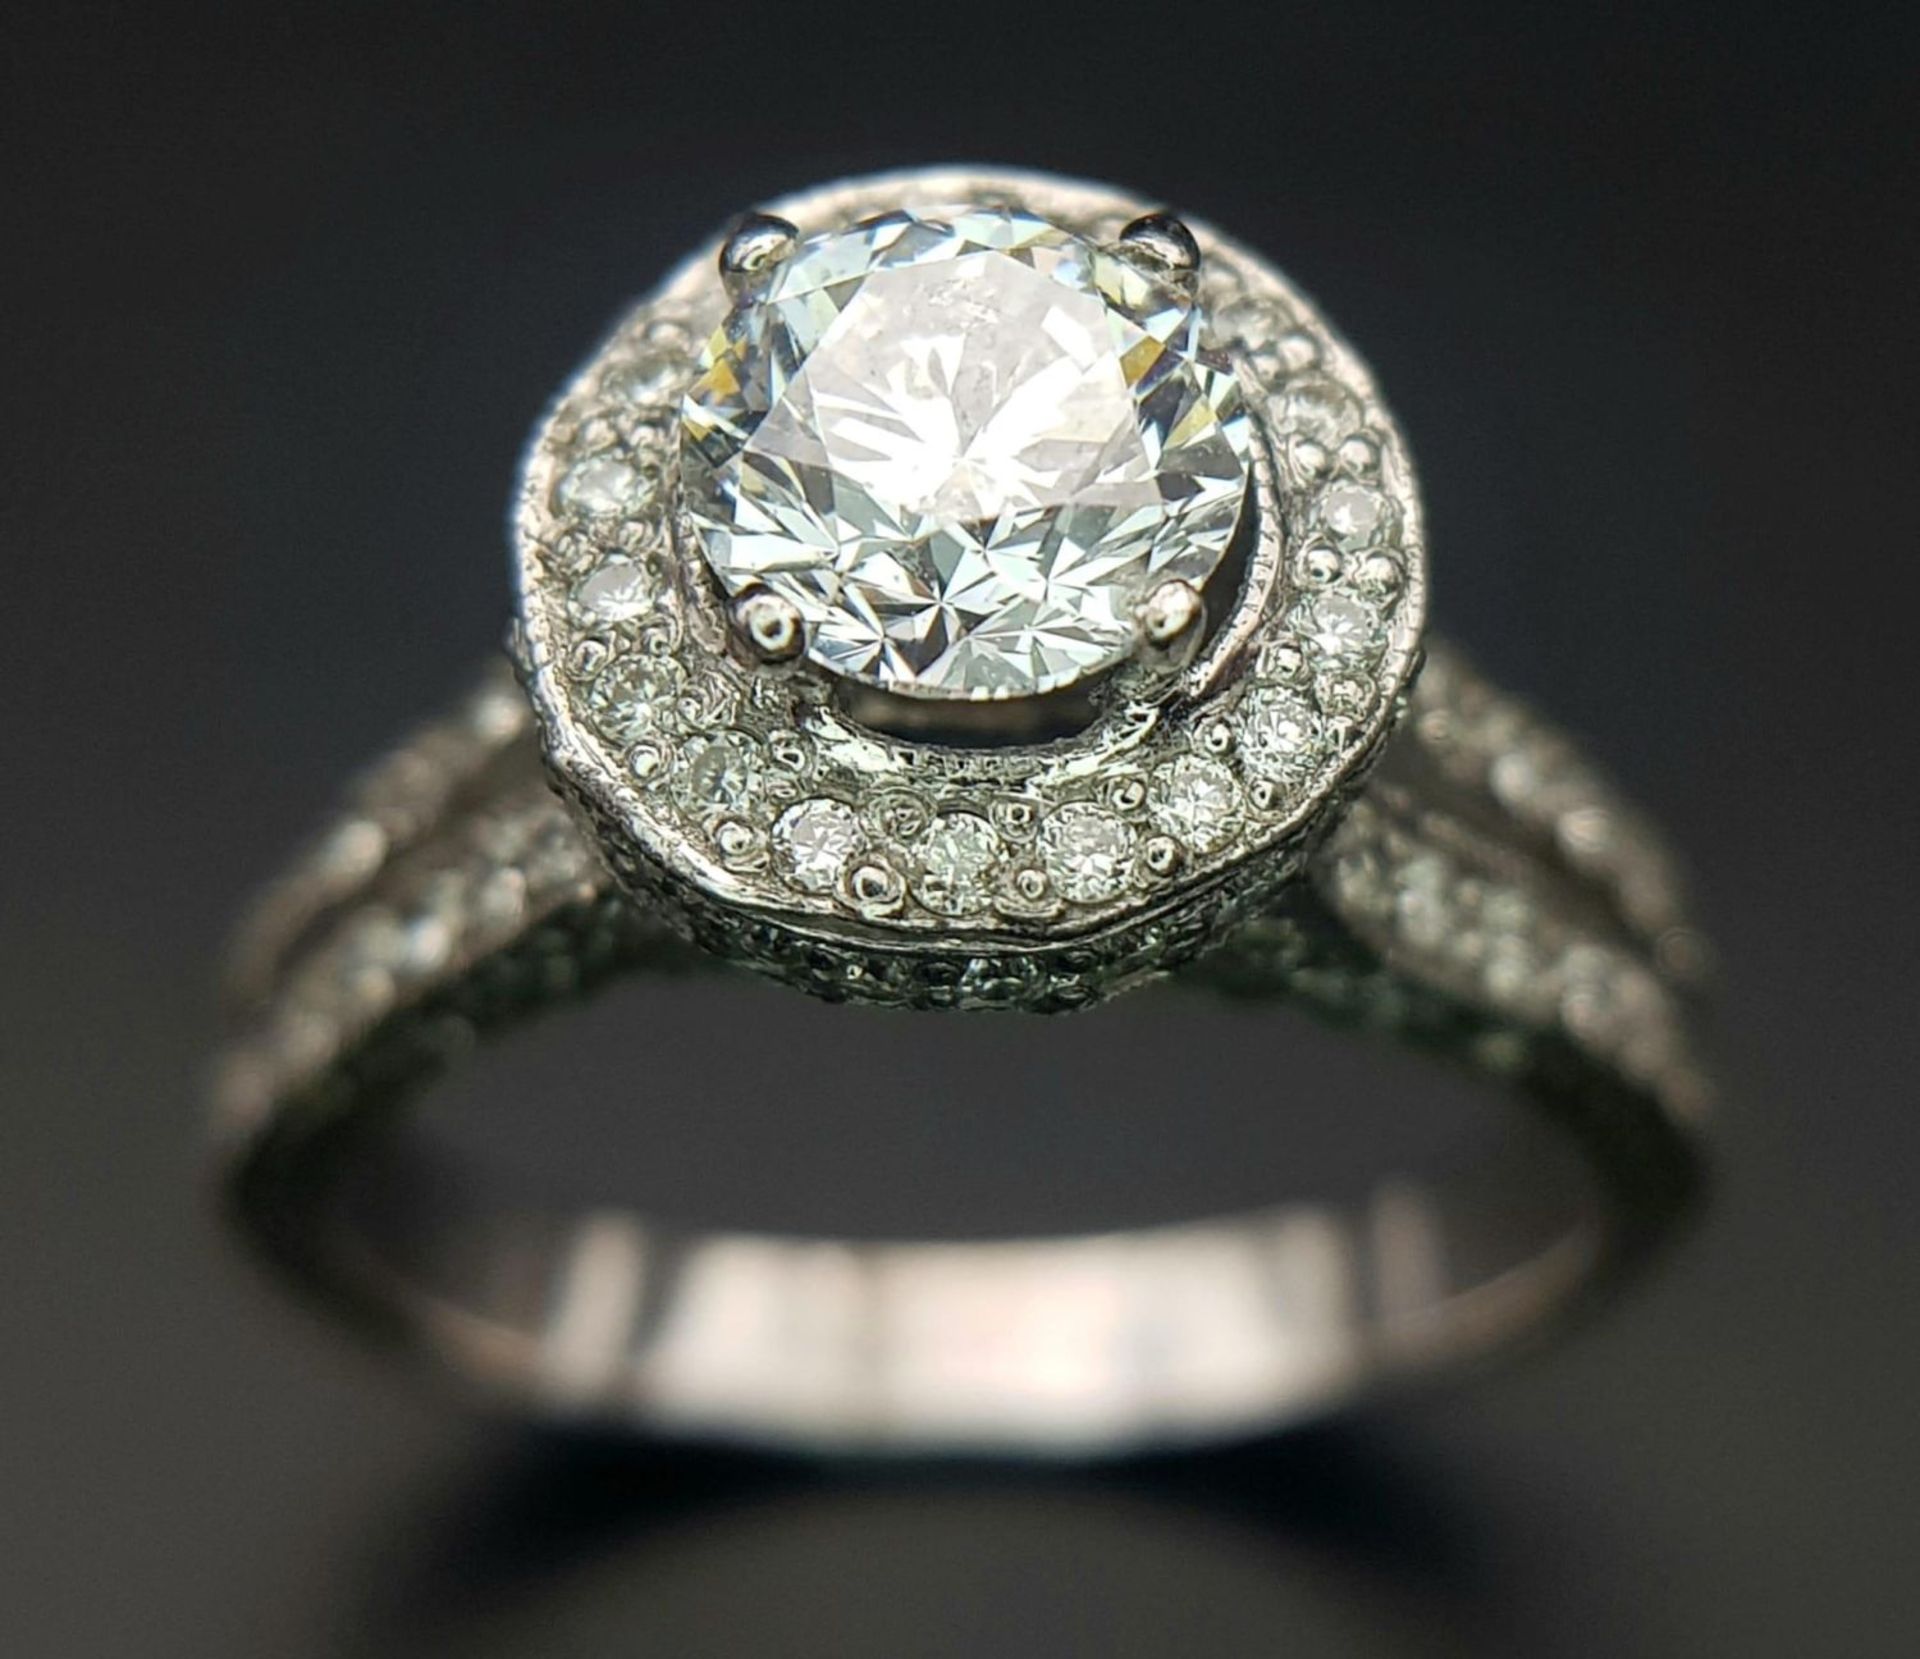 An 18 K white gold ring with a brilliant cut diamond (1.01 carats) surrounded by diamonds on the top - Image 3 of 22